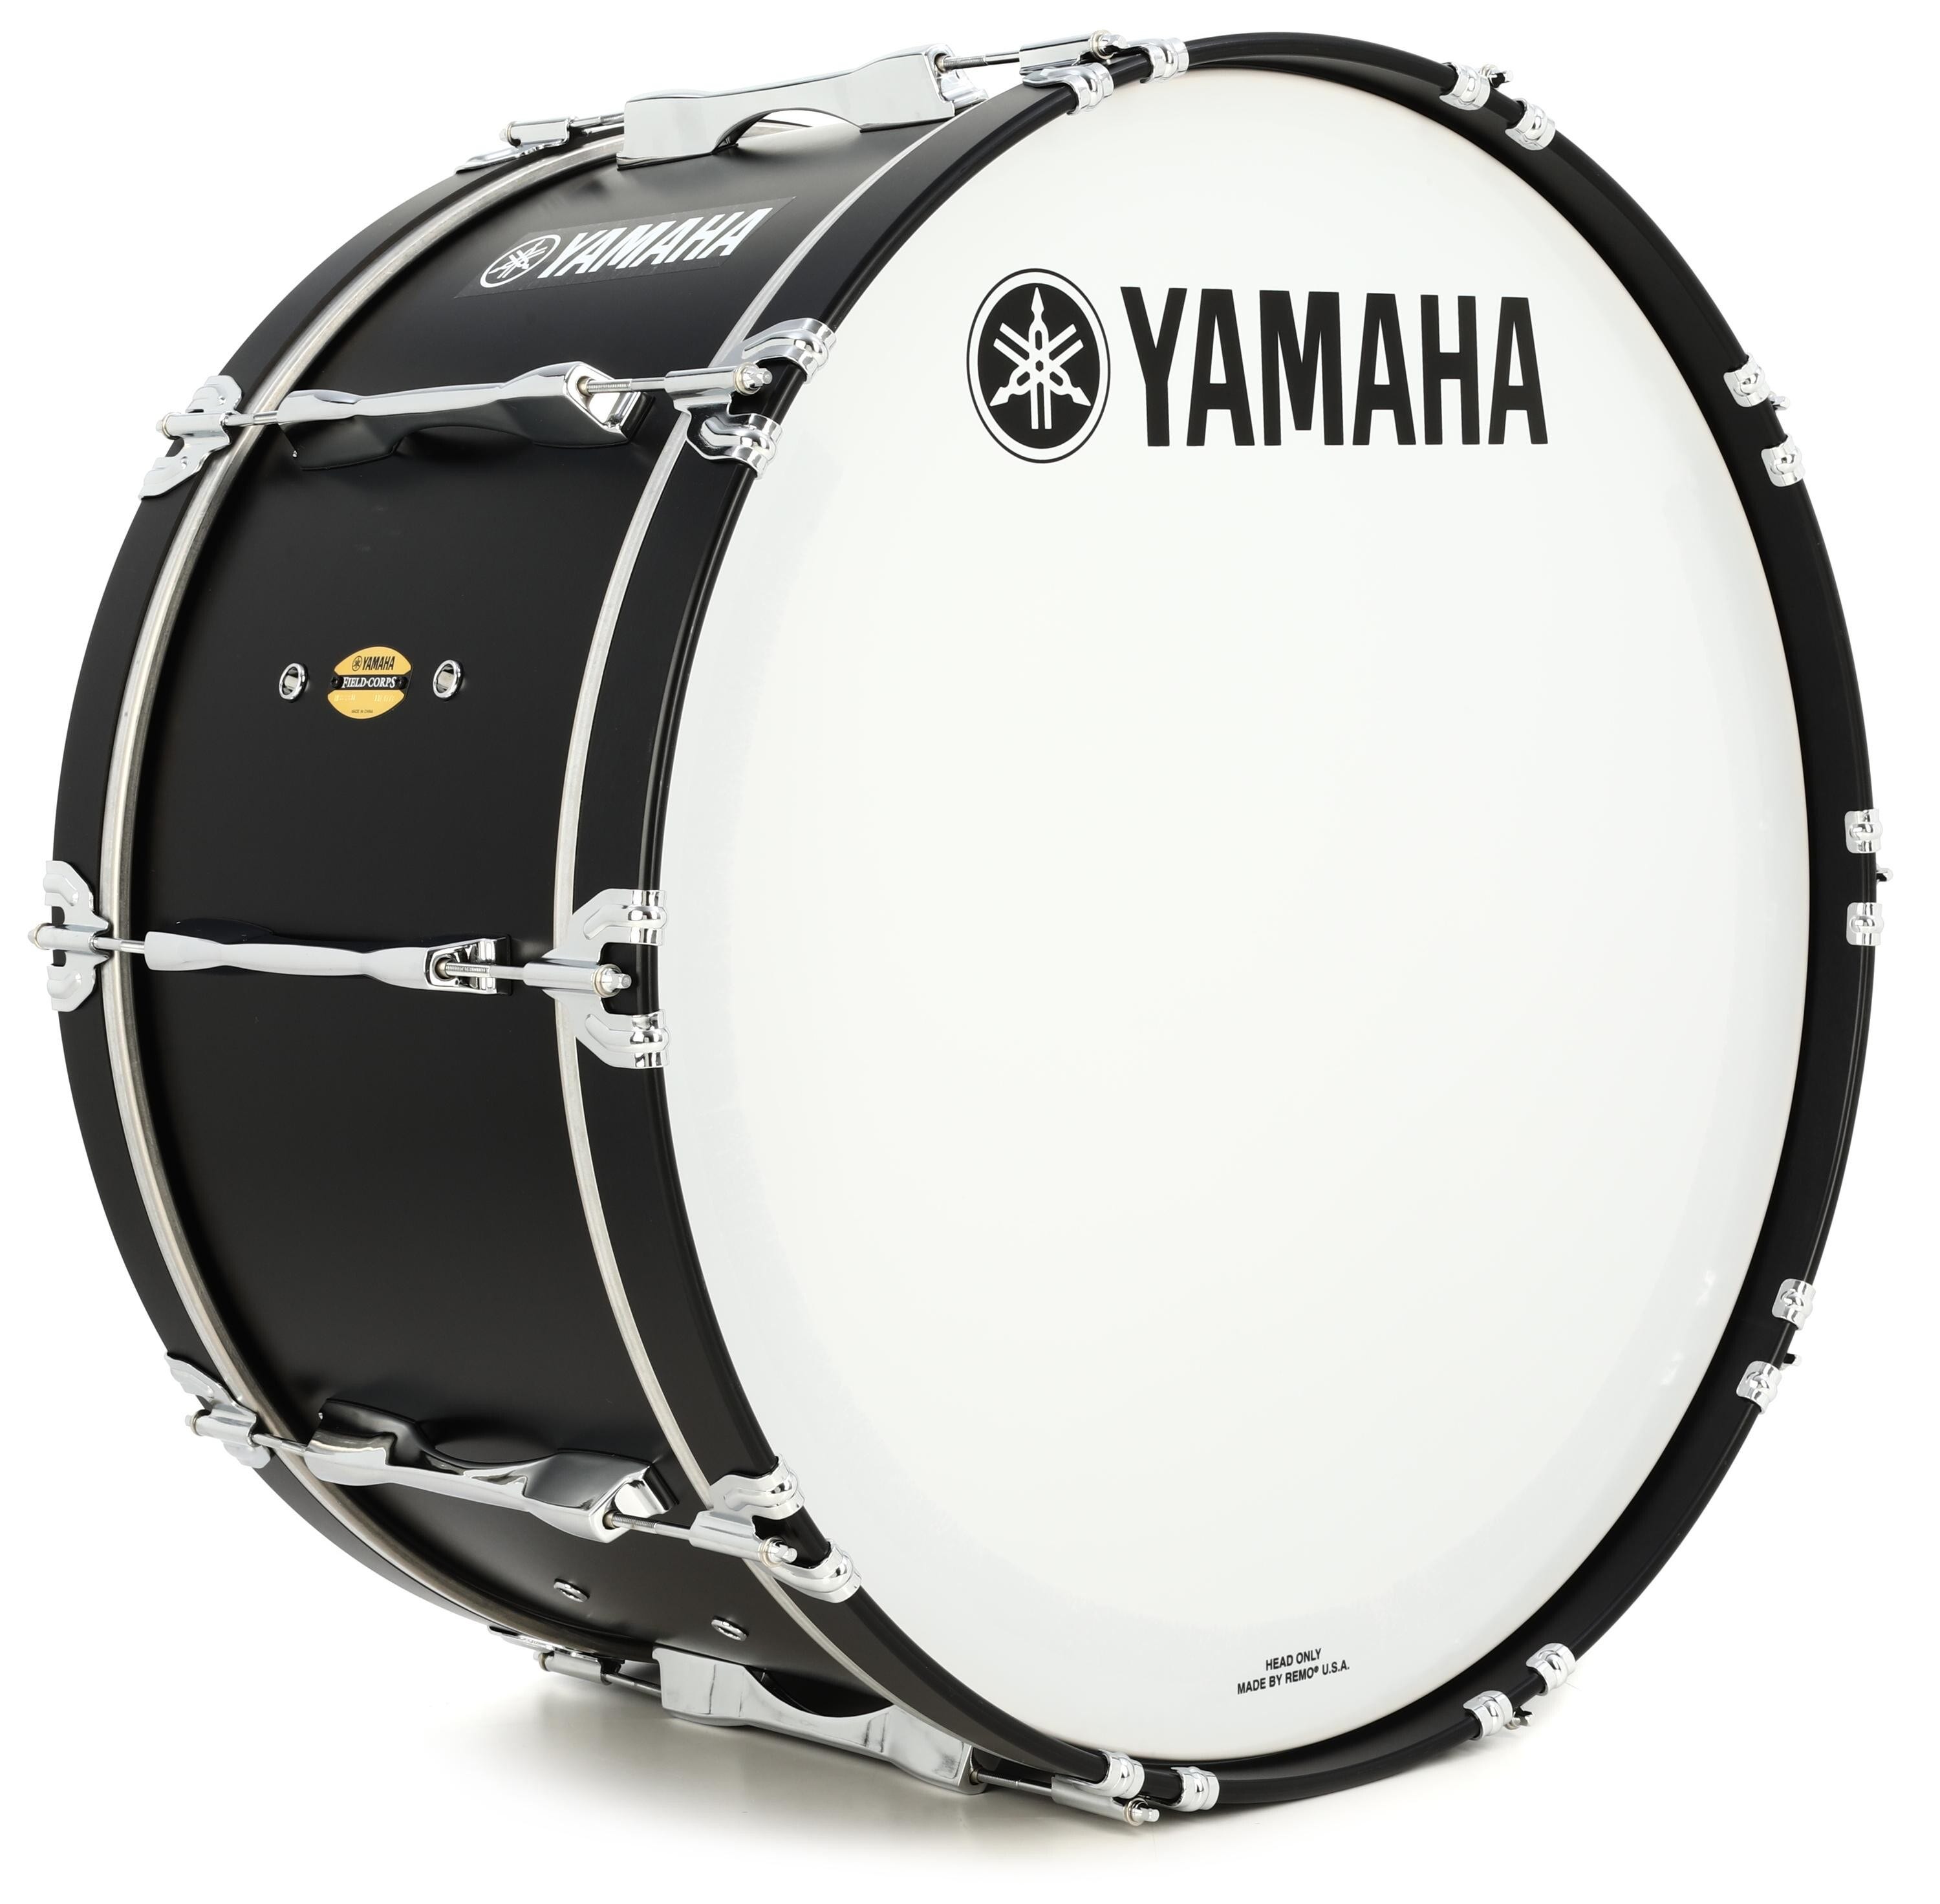 Yamaha Snare Drum Wires - Overview - Concert Hardware & Accessories -  Percussion Accessories - Percussion - Musical Instruments - Products -  Yamaha USA